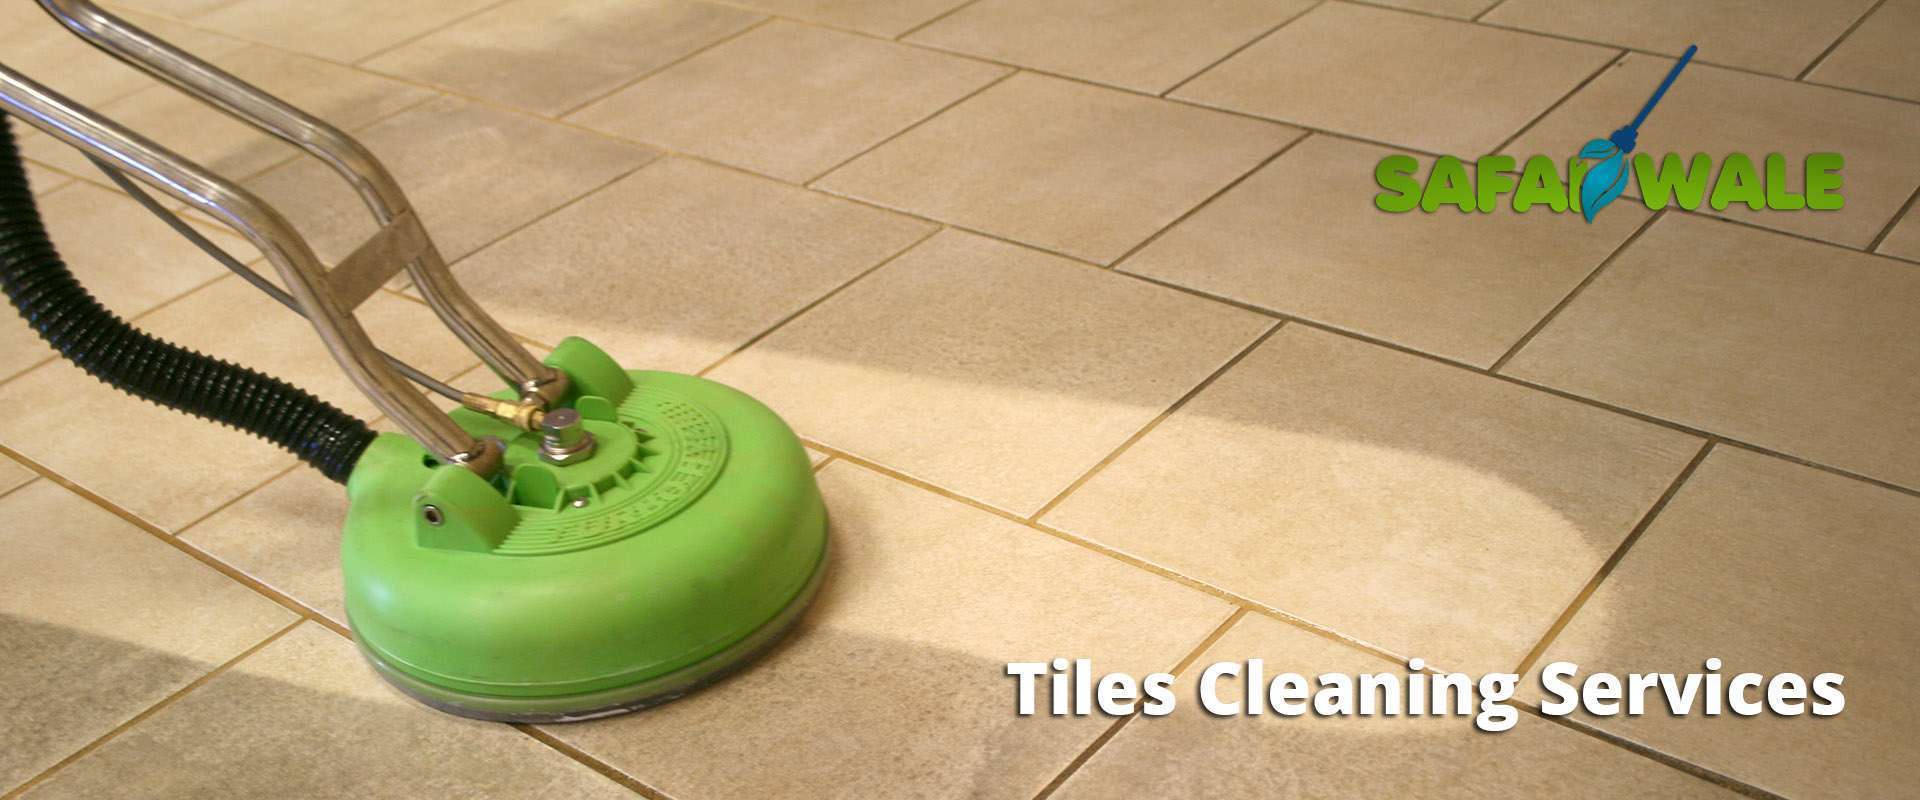 Tiles Cleaning Services In Noida